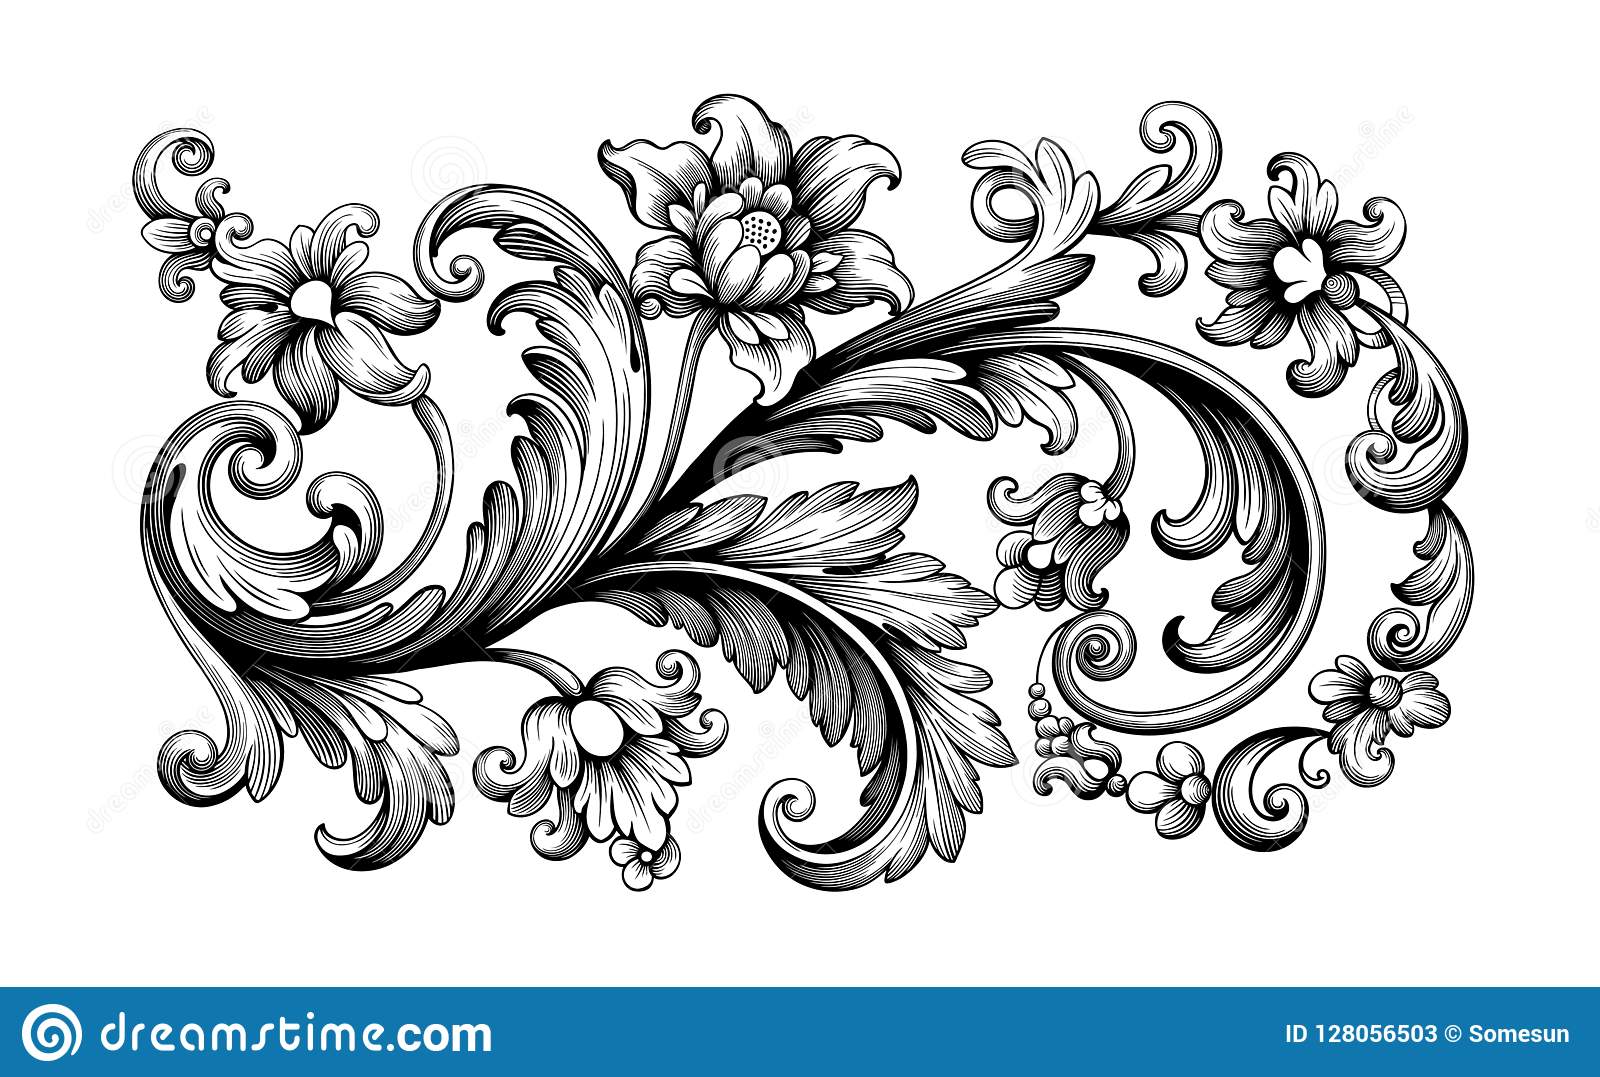 Western Filigree Vector at Vectorified.com | Collection of Western